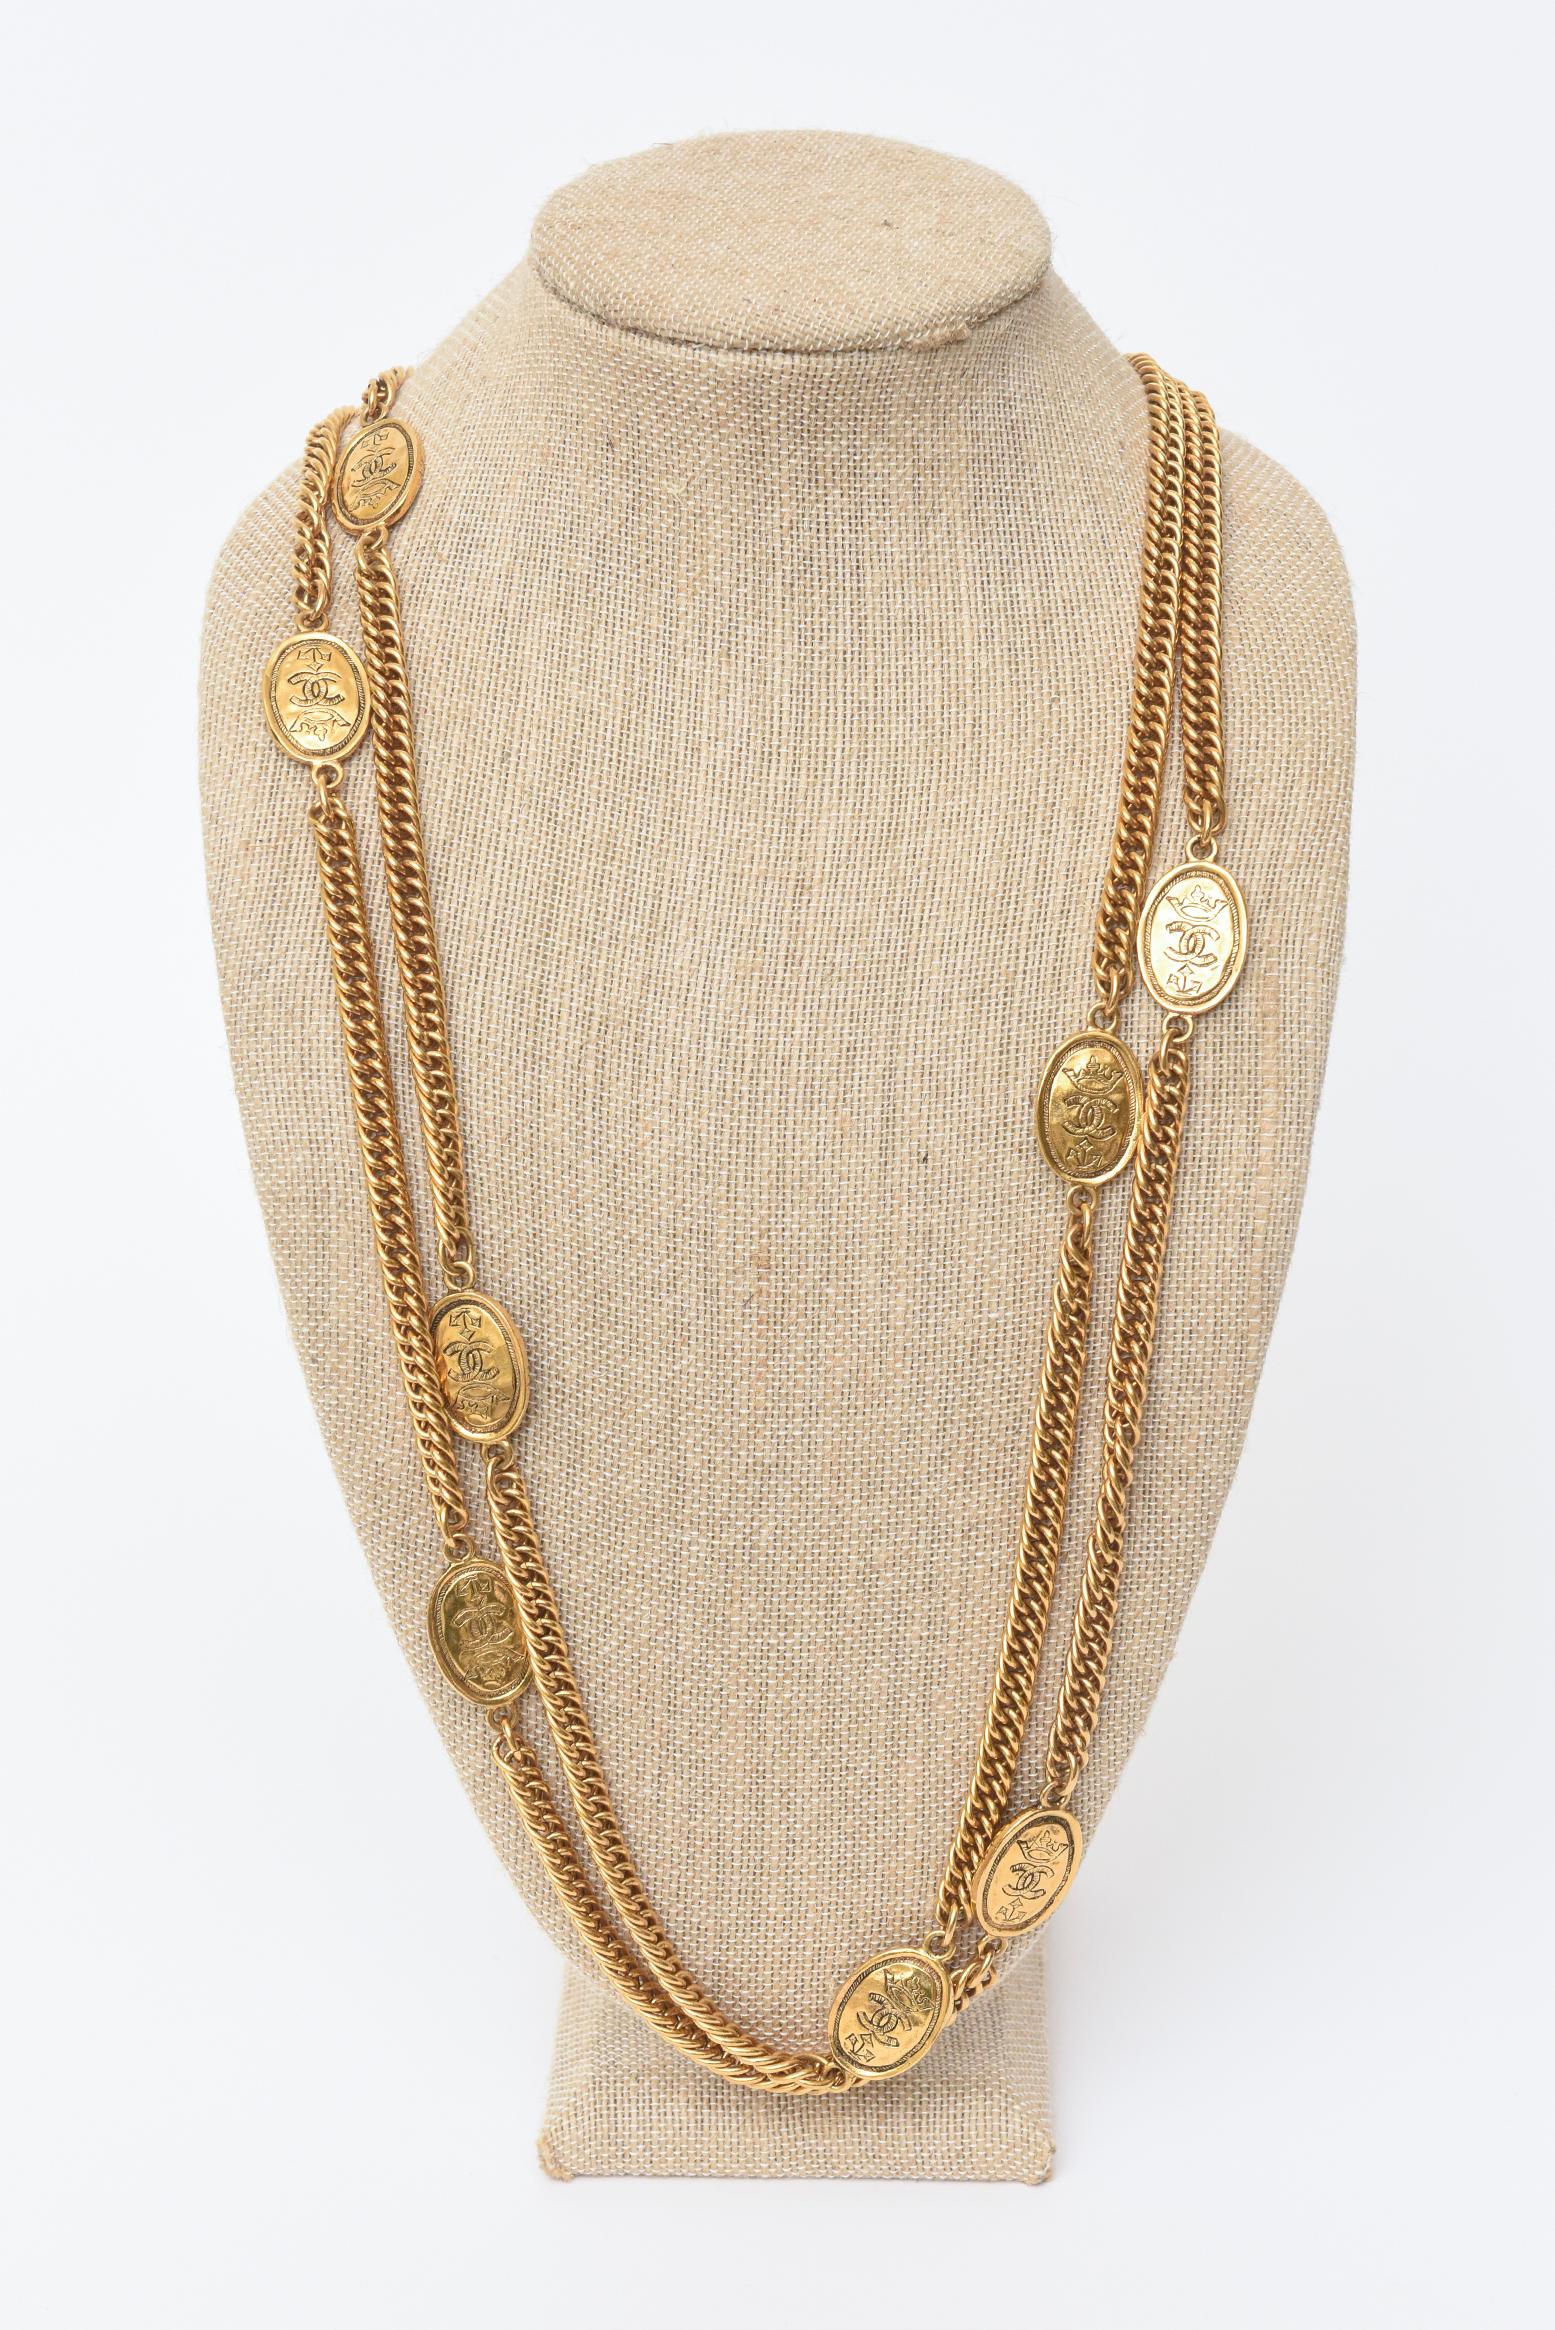 Chanel Vintage Gold Plated Chain Wrap Necklace With Royal Medallions  3